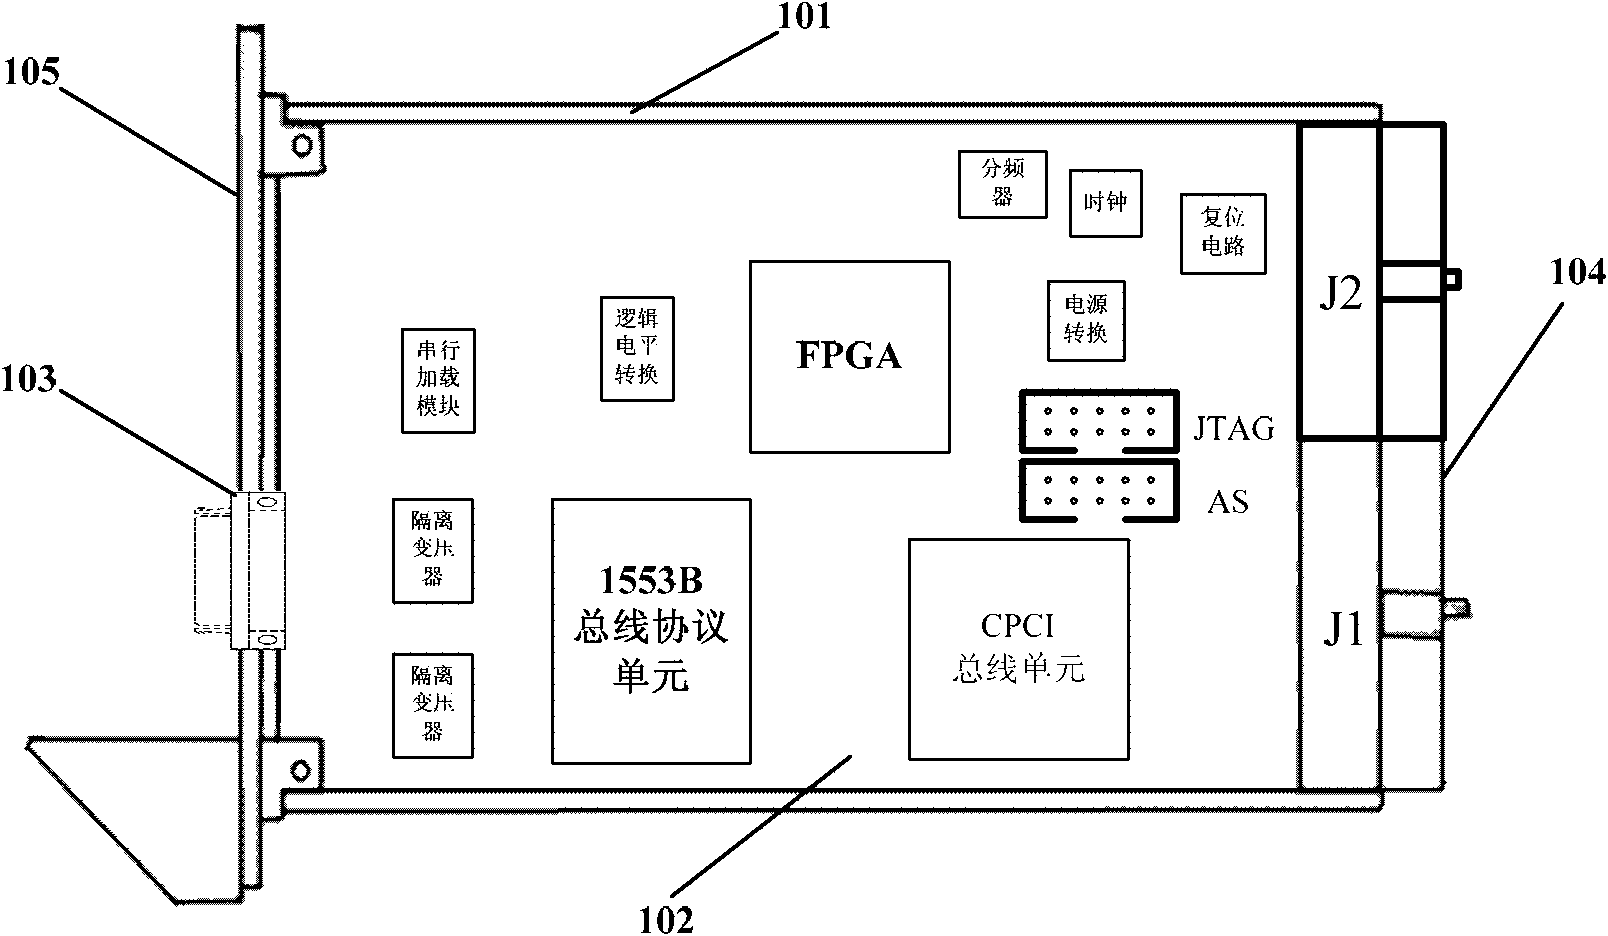 Compact peripheral components interconnect (CPCI)-bus-based 1553B protocol data communication and serial loading module